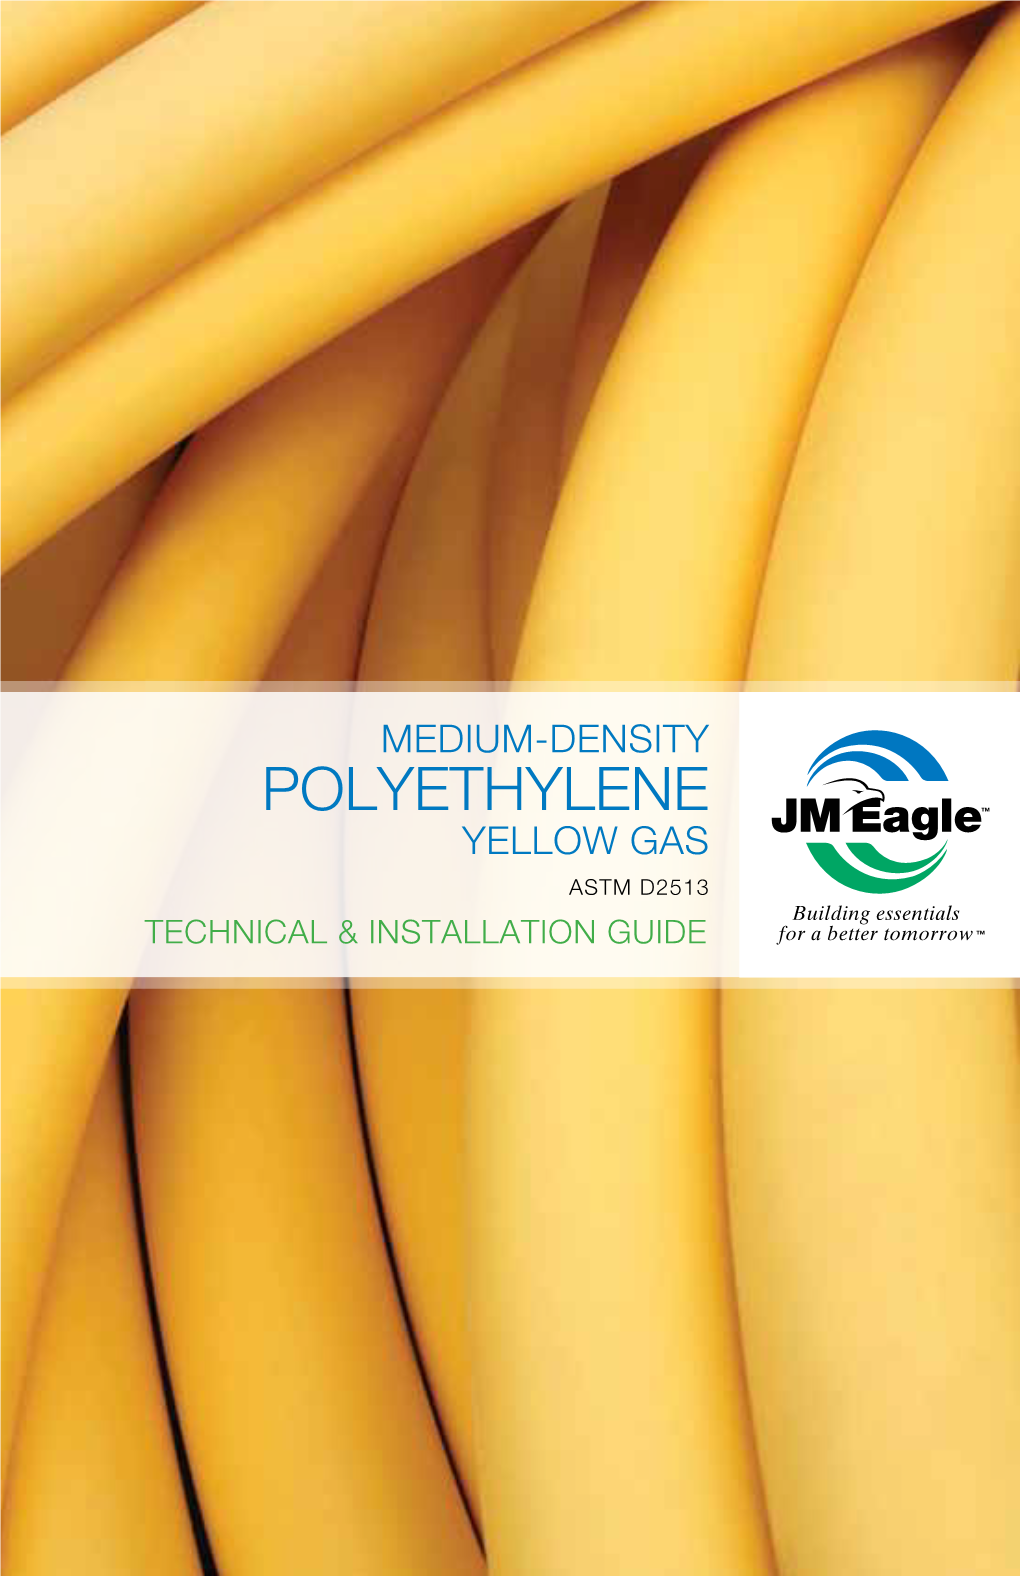 POLYETHYLENE YELLOW GAS ASTM D2513 Building Essentials TECHNICAL & INSTALLATION GUIDE for a Better Tomorrow Medium-Density POLYETHYLENE YELLOW GAS Contents